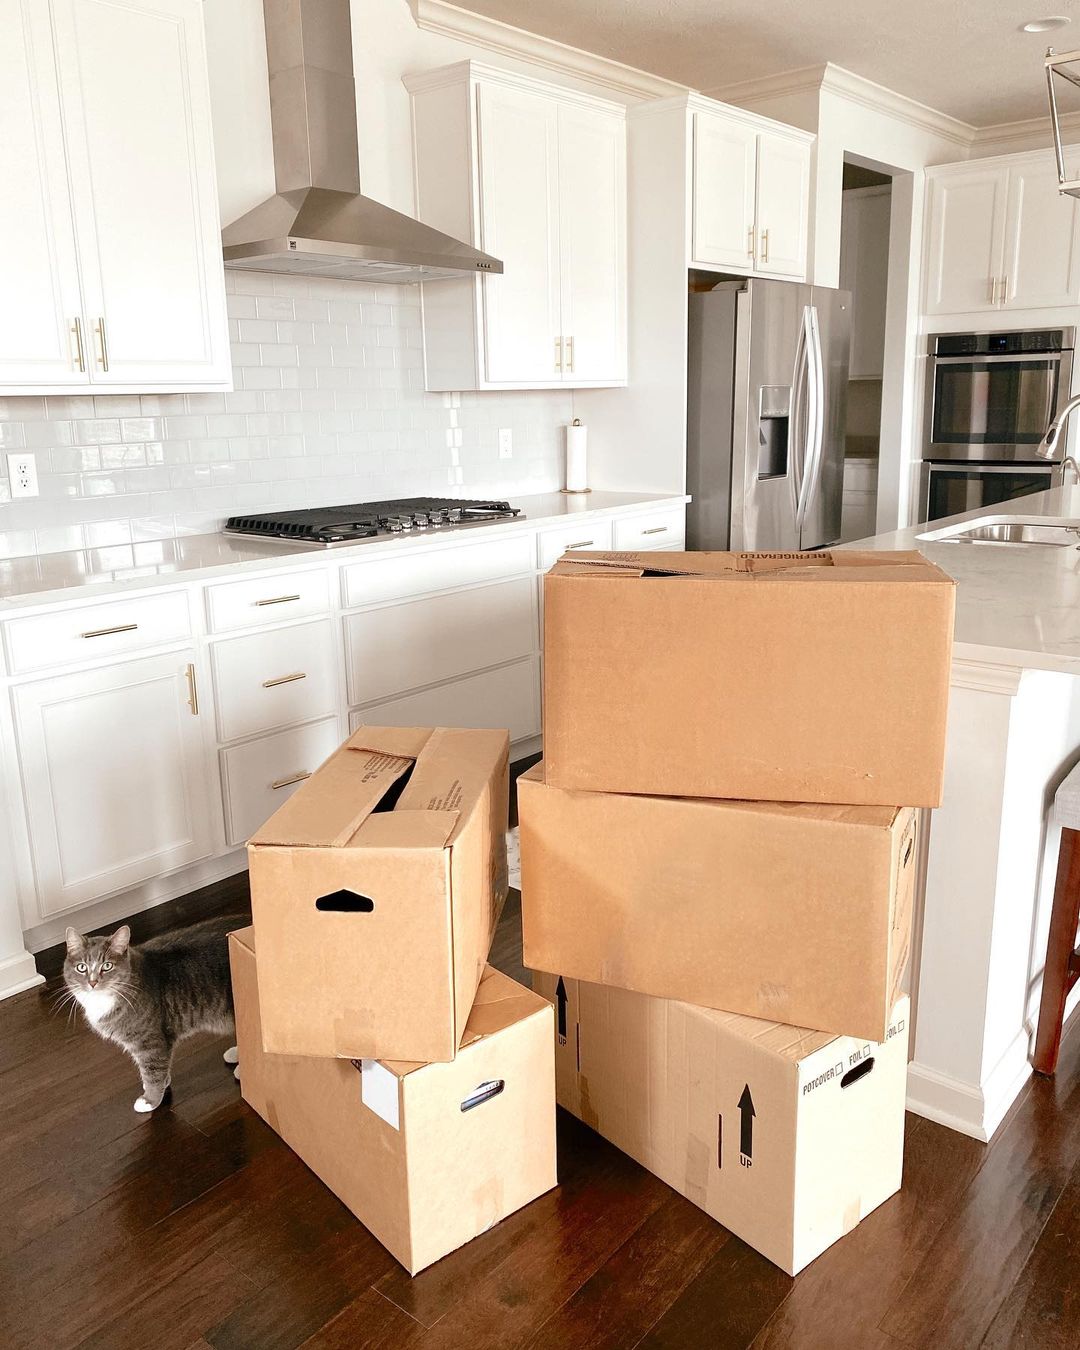 Packed boxes in an empty kitchen; there's a cat peeking out behind them. Photo by Instagram user @emilysomerssmith.